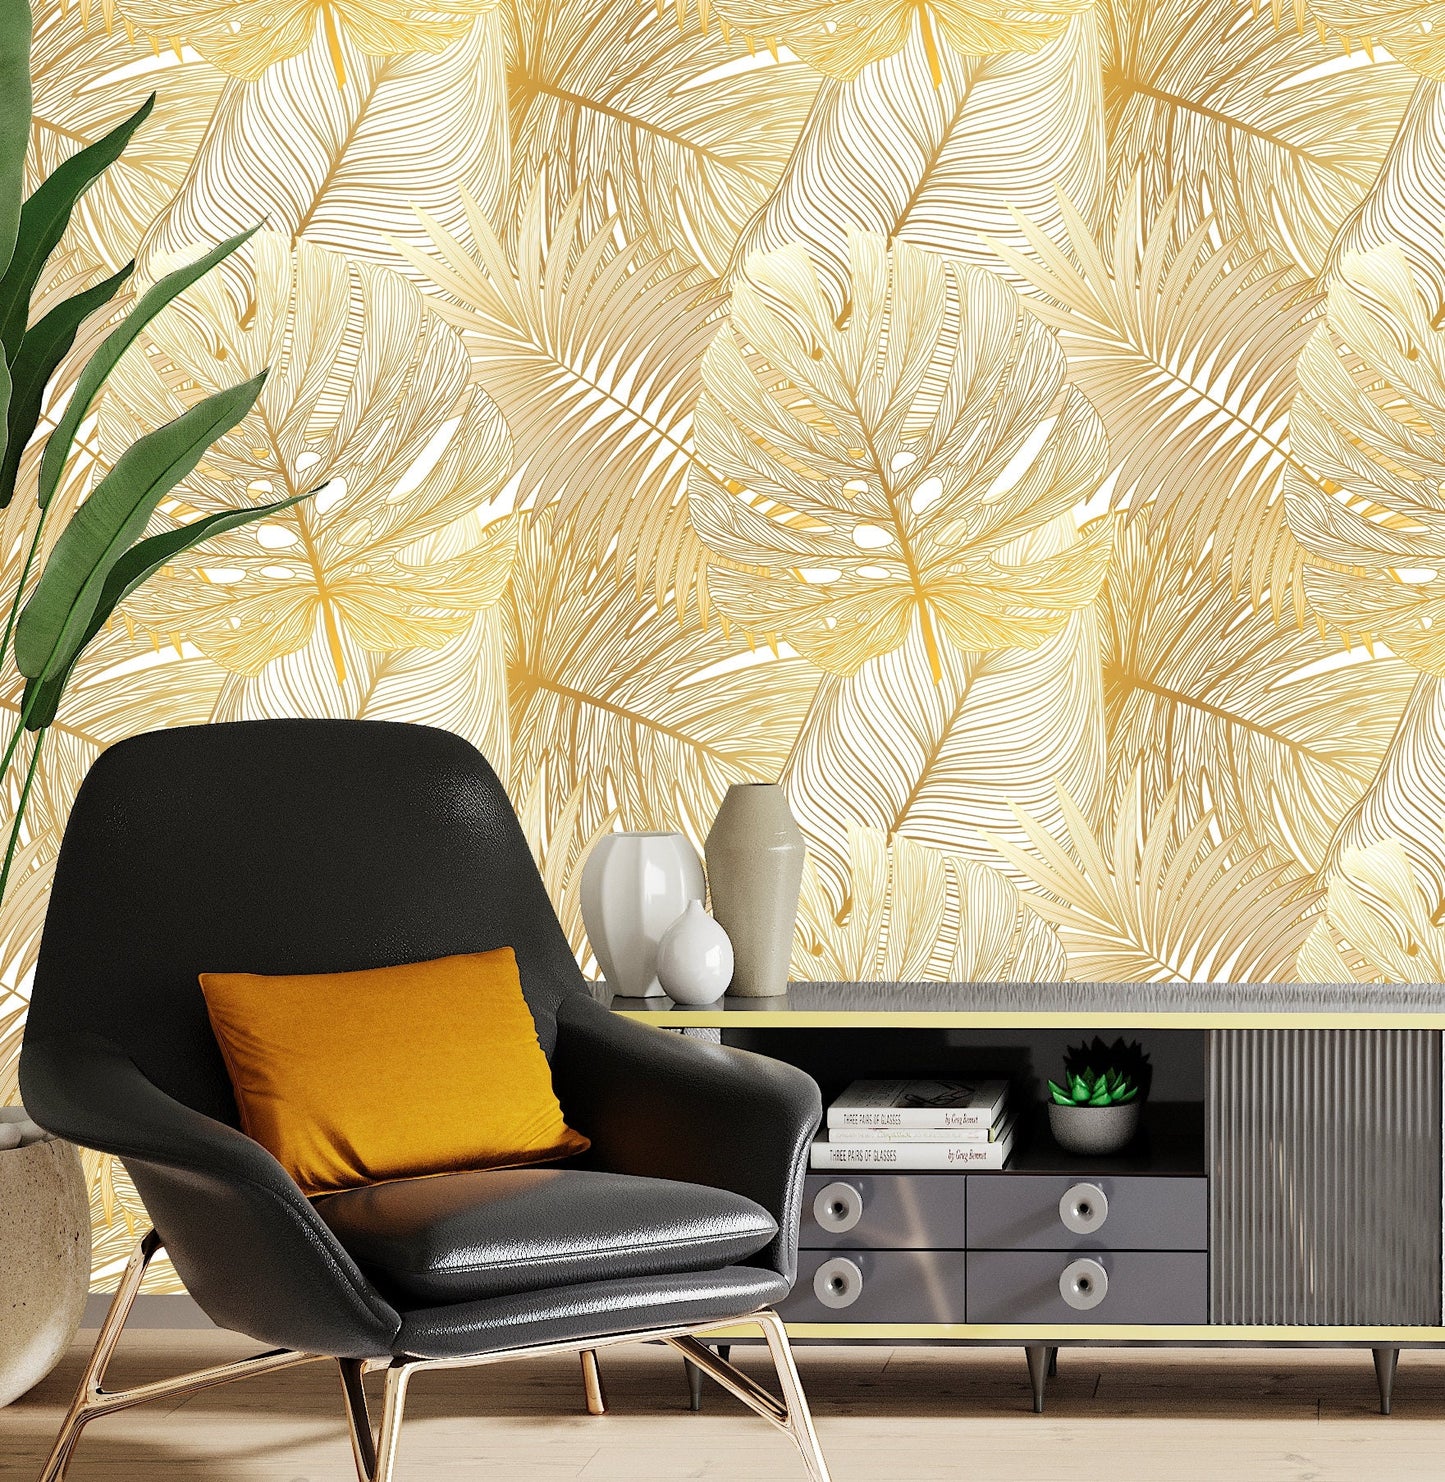 Gold Leaf Wallpaper Peel and Stick, Palm Leaf Wallpaper, Yellow Wallpaper, Self Adhesive Wallpaper, Removable Wall Paper